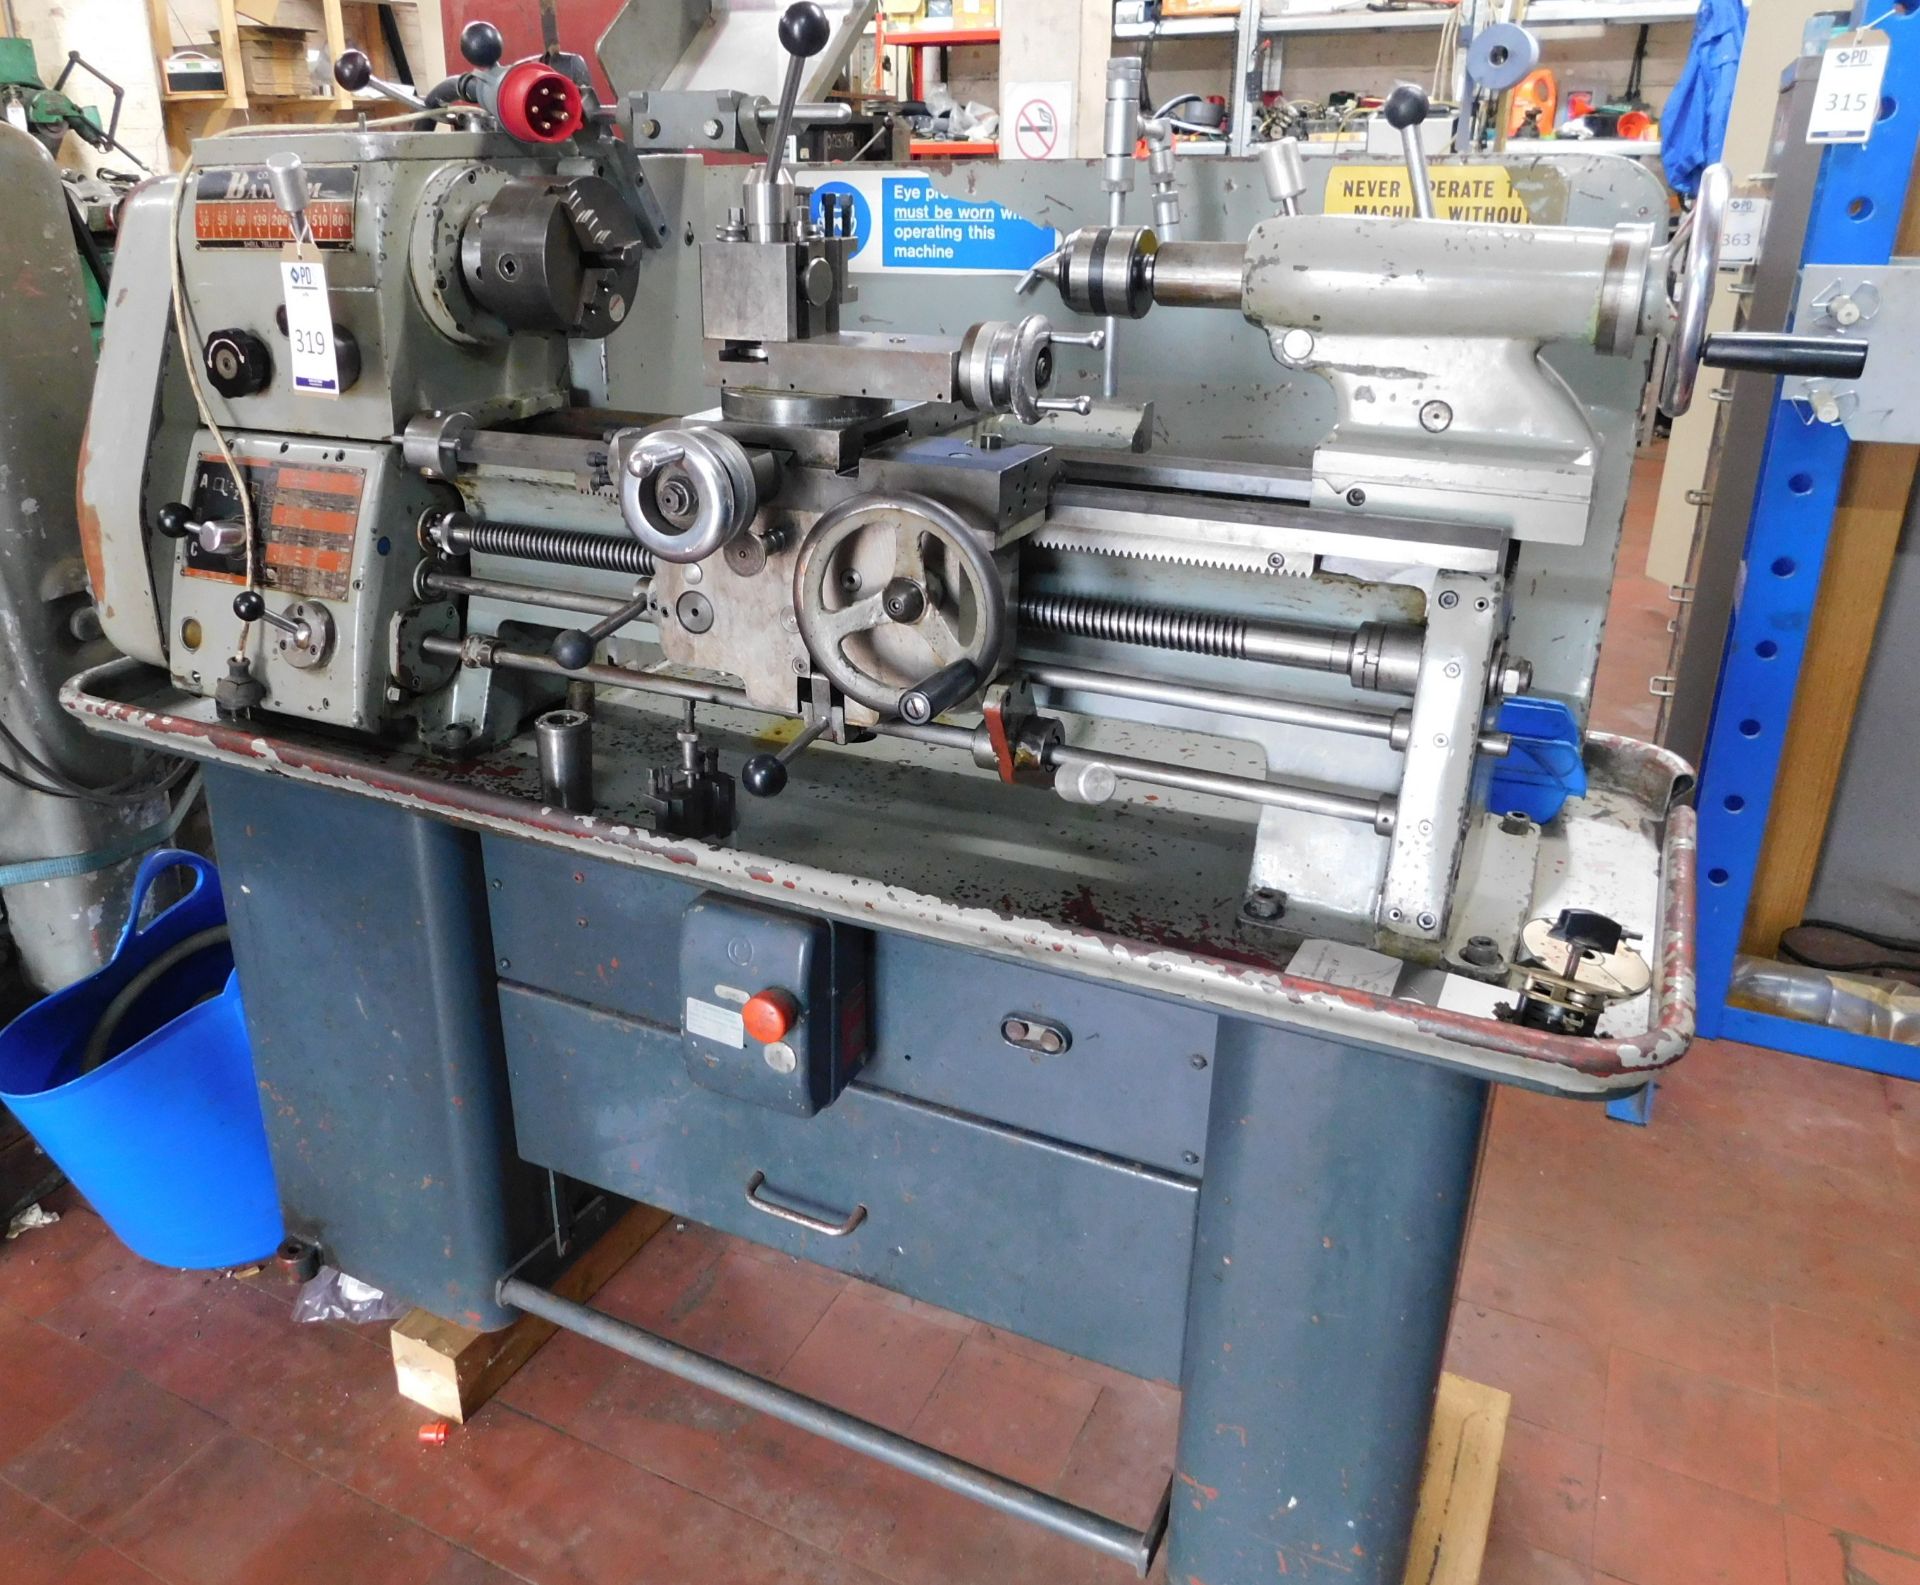 Colchester Bantam Gap Bed Lathe (Condition Unknown) (Location: Bolton. Please Refer to General